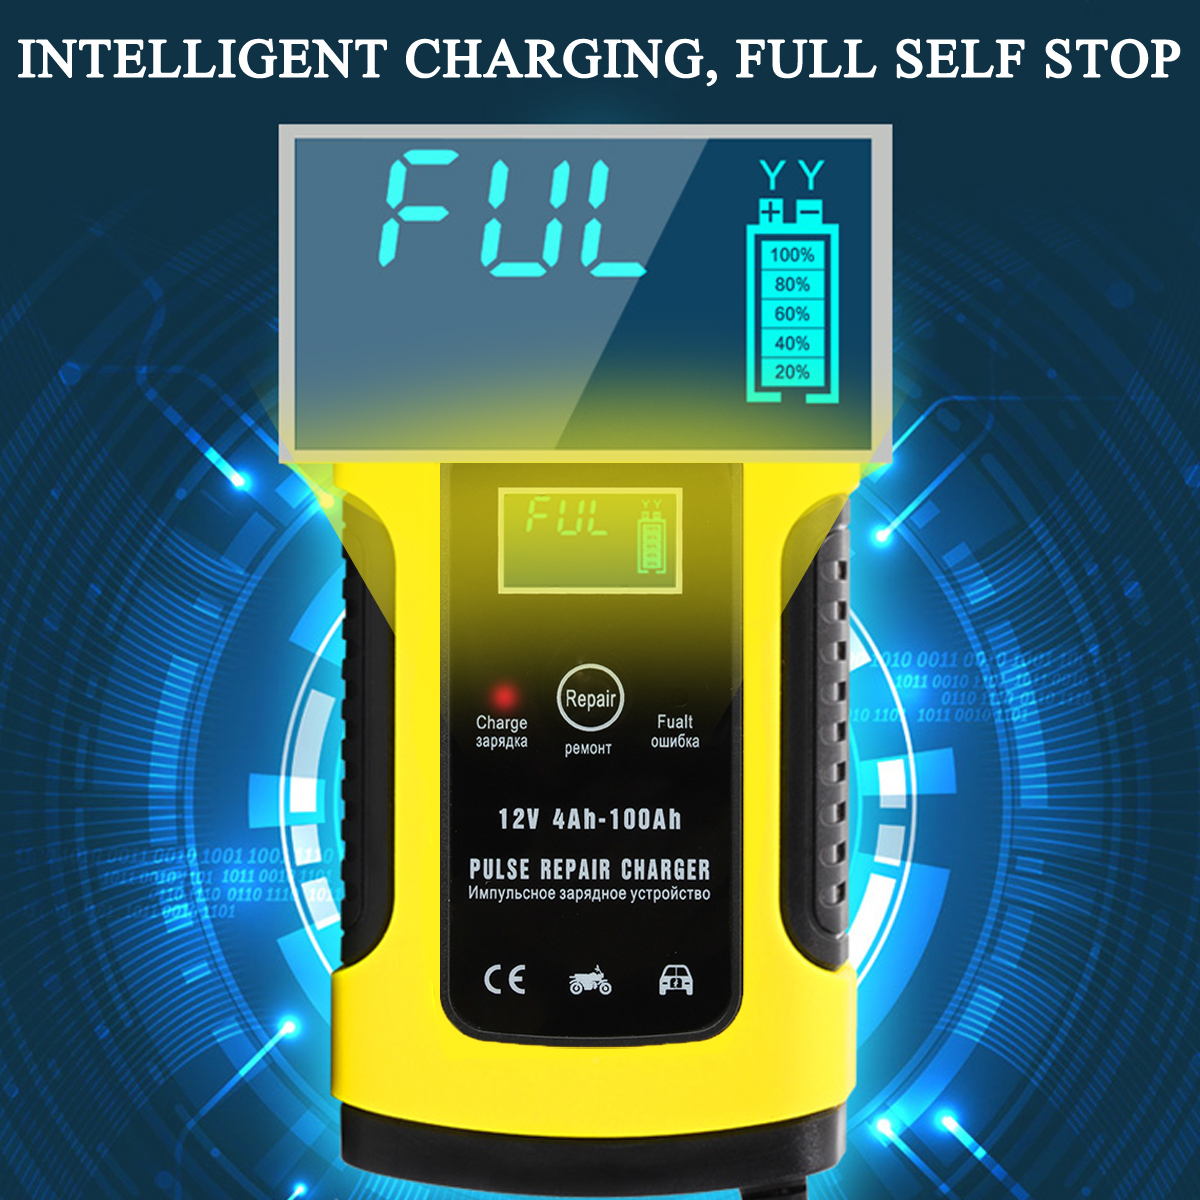 12V-5A-Pulse-Repair-Charger-with-LCD-Display-Battery-Charger-Lead-Acid-AGM-GEL-WET-Battery-Charger-1356466-5